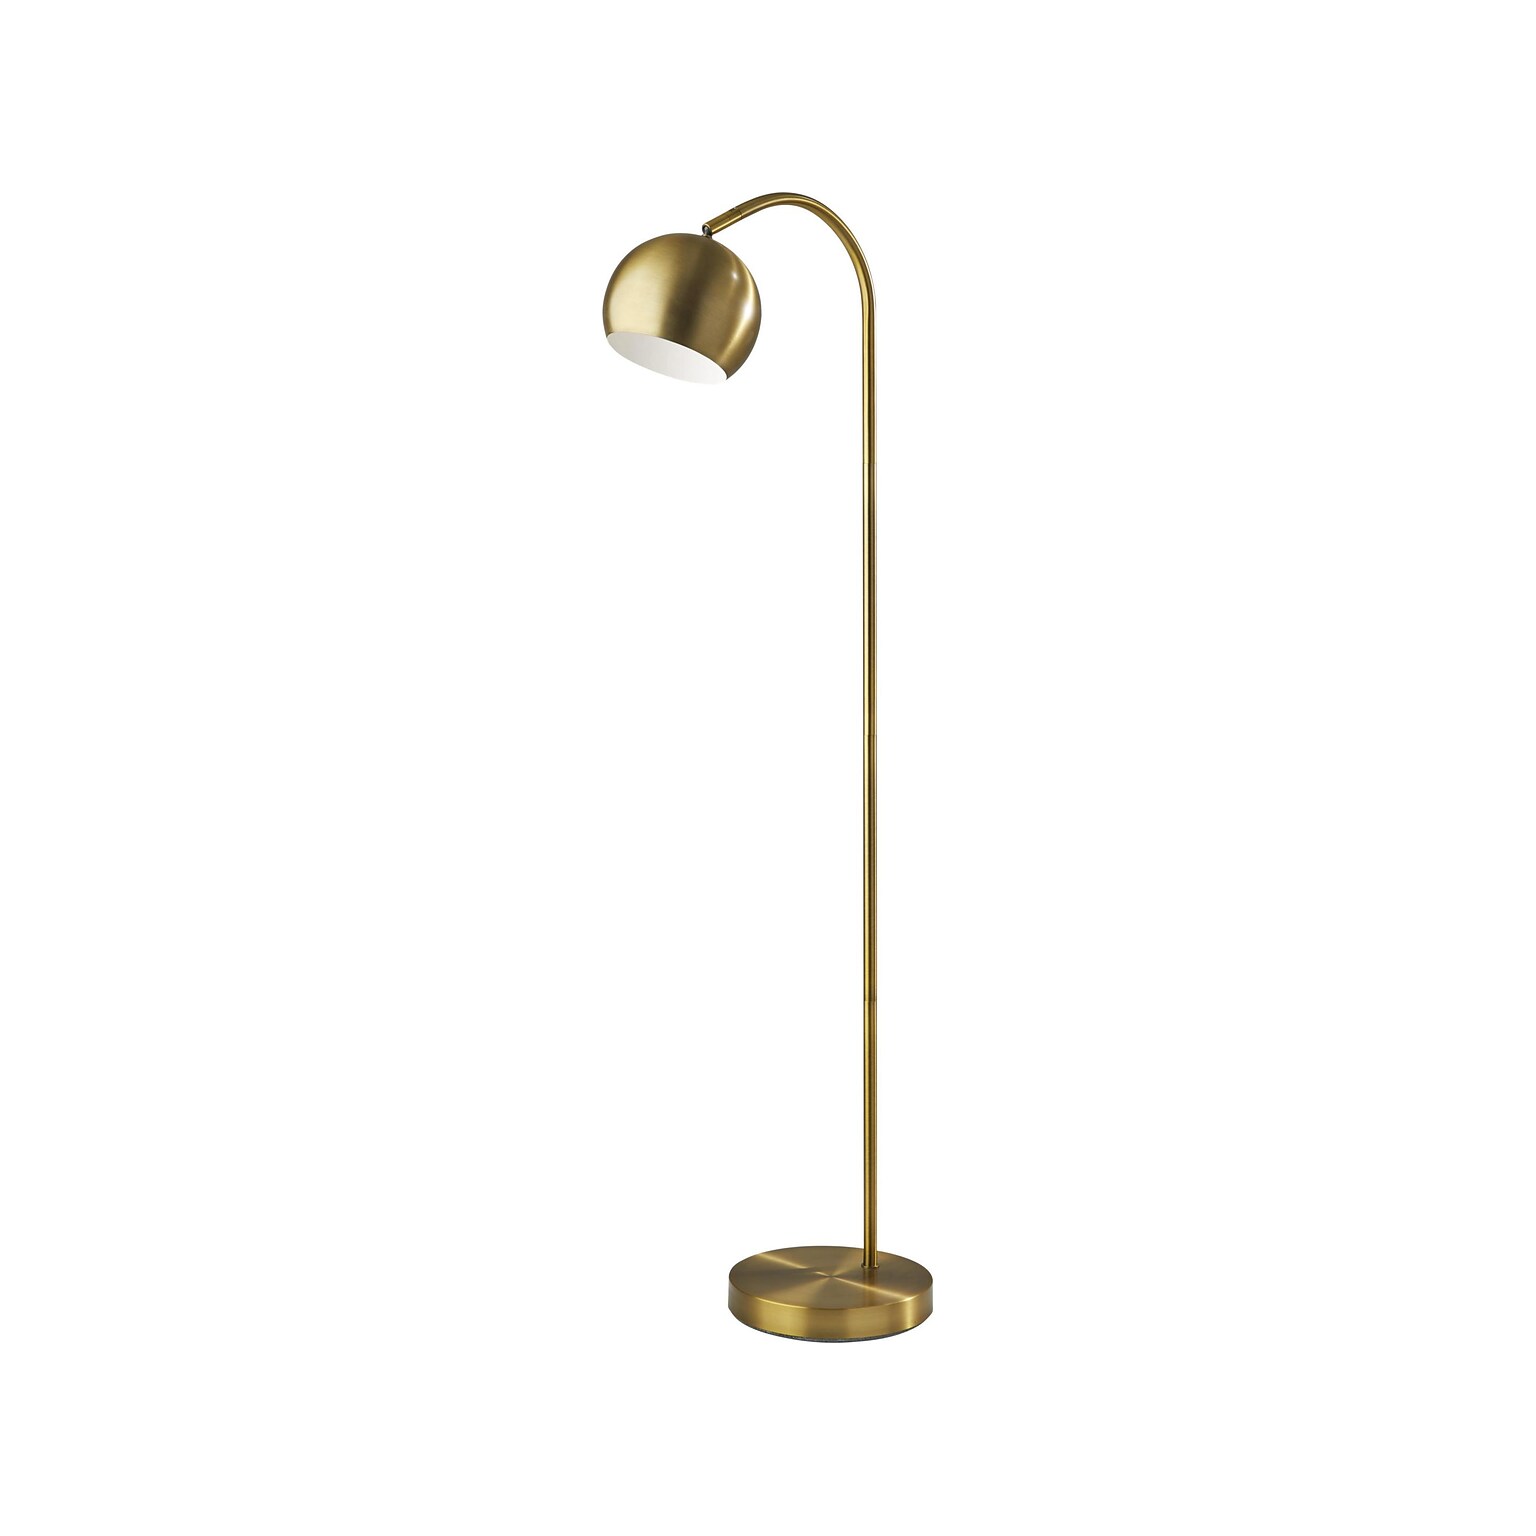 Adesso Emerson 59 Antique Brass Floor Lamp with Globe Shade (5138-21)